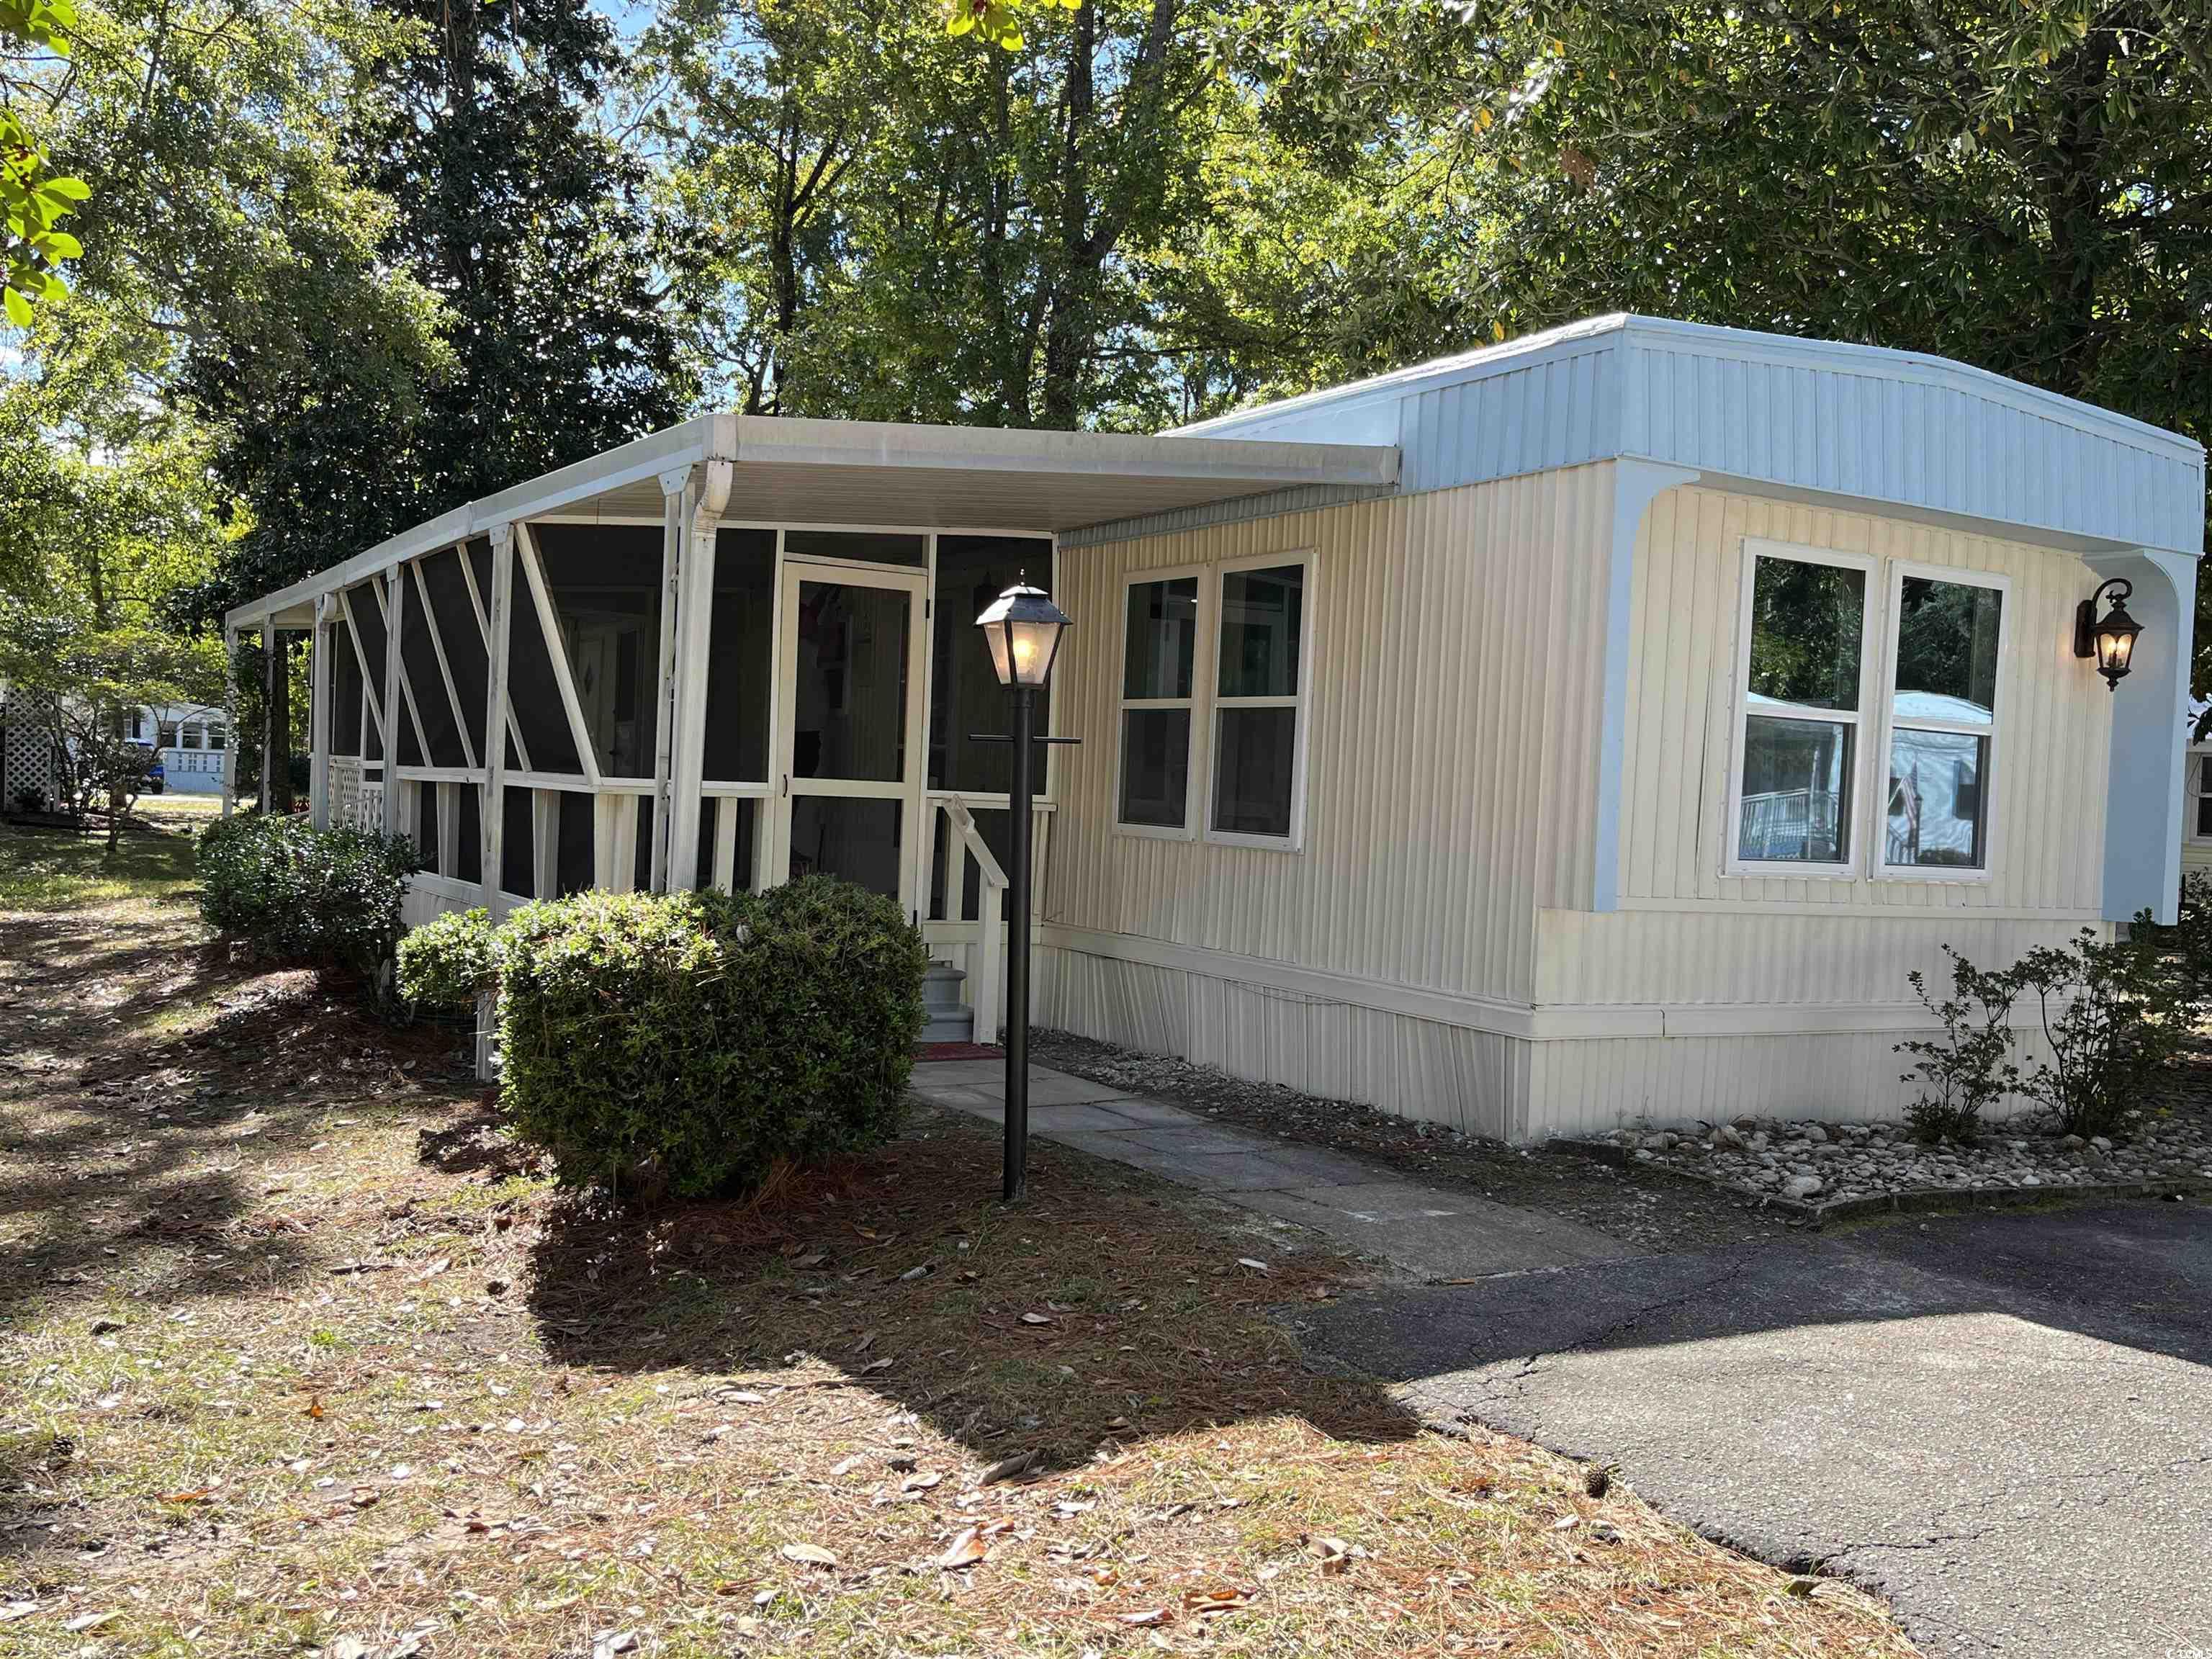 check out this charming two-bedroom, one-bath manufactured home nestled in a serene 55+ community just a short golf cart ride to the beach. this cozy beach cottage boasts a second bedroom complete with a separate sitting area, perfect for transforming into your own private sitting area. this room also has a private separate entrance for your guests to come and go privately. this completely renovated home offers new hvac, new hotwater heater, new stainless steel appliances, new kitchen cabinets with granite counters, new lvp flooring, new roof, new windows, fresh neutral paint, new double sink vanity, walk in shower. enjoy the best of beachside living in this affordable and comfortable home, offering both relaxation and convenience in a vibrant 55+ community. don't miss the opportunity to make this seaside oasis your own! owner is a licensed sc realtor.